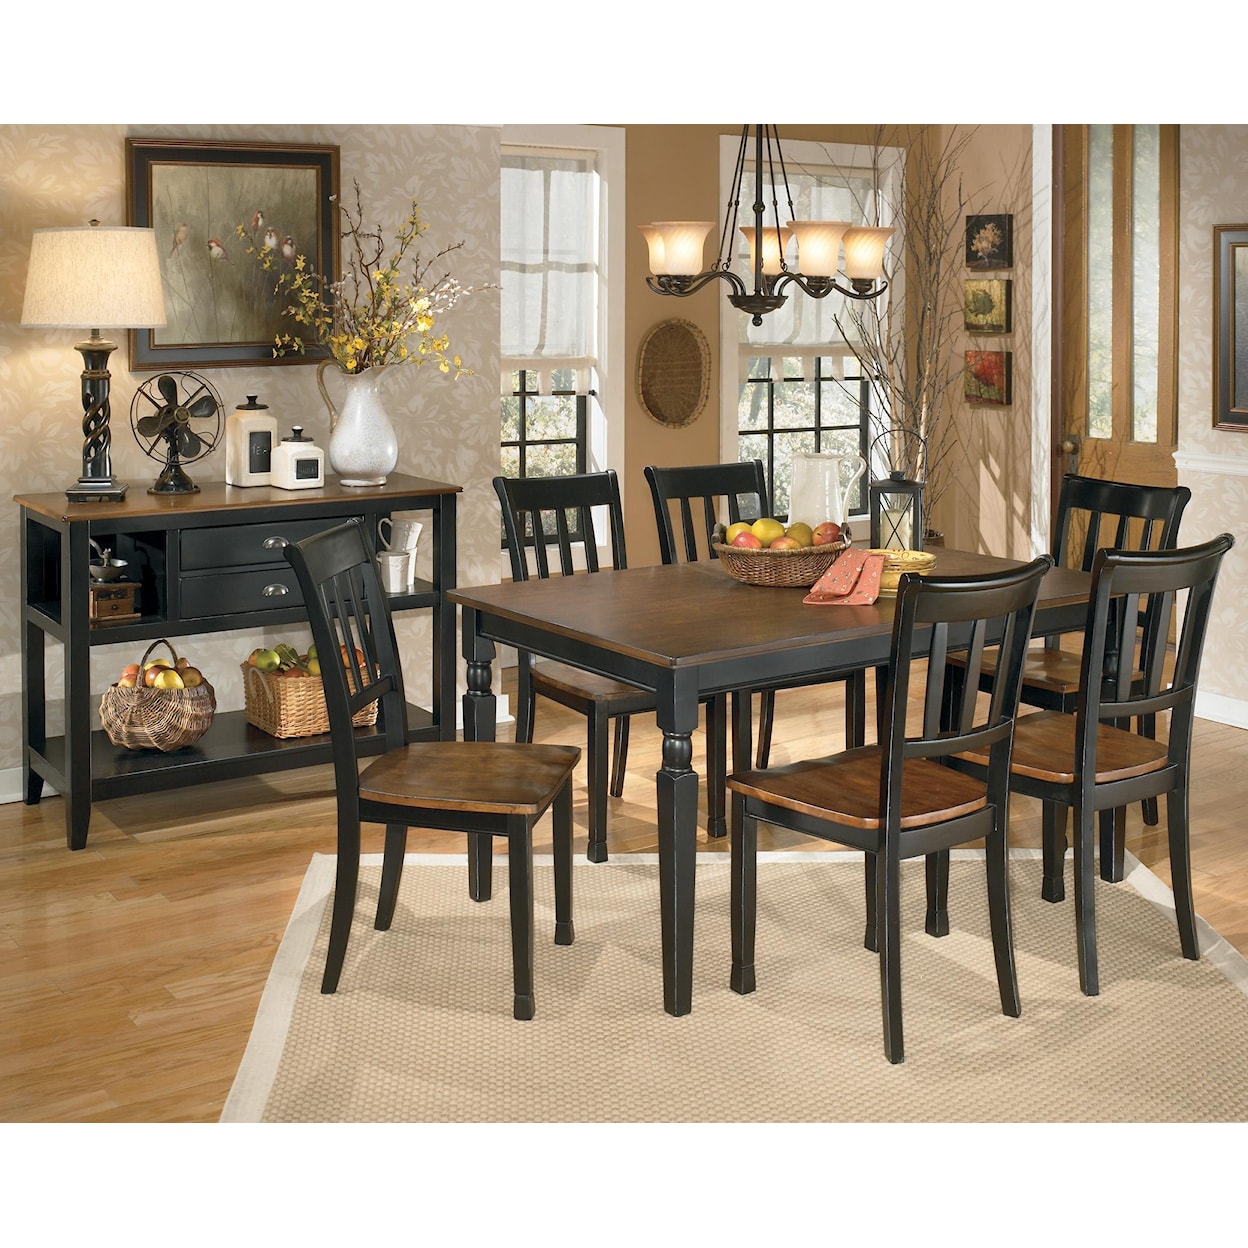 Signature Design by Ashley Owingsville Rectangular Dining Room Table